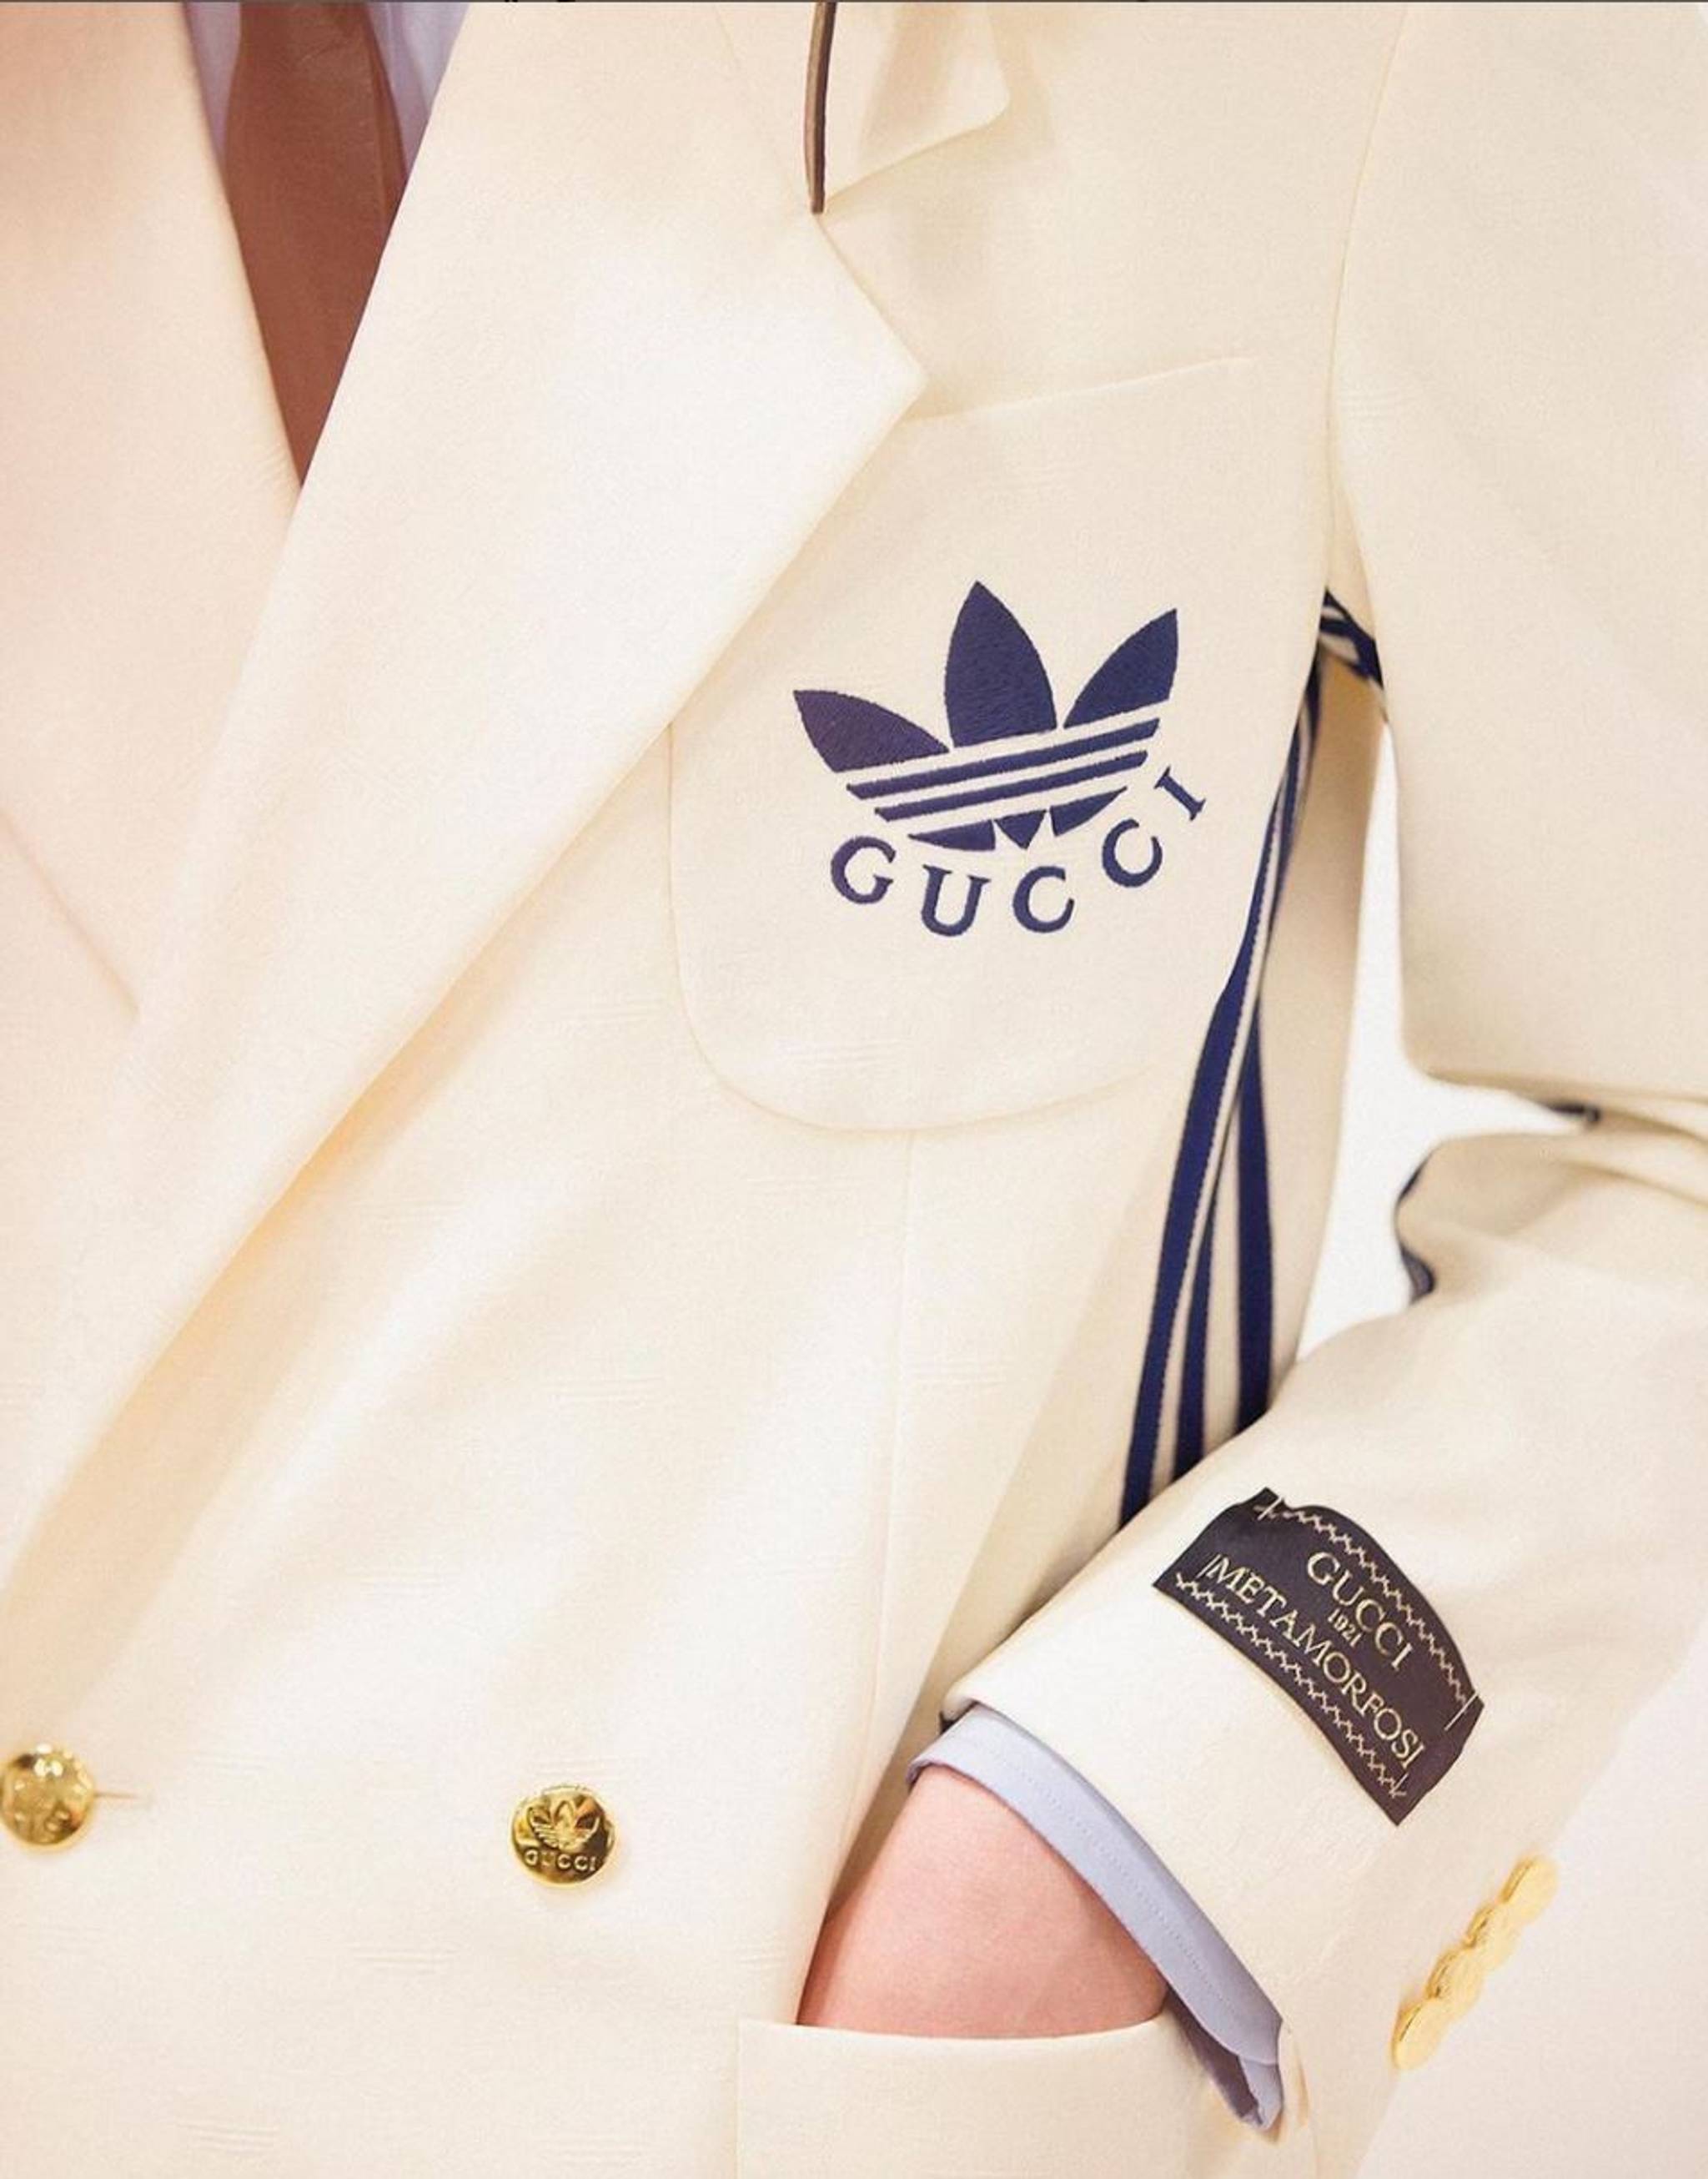 adidas x Gucci elevates streetwear for luxe fashion fans